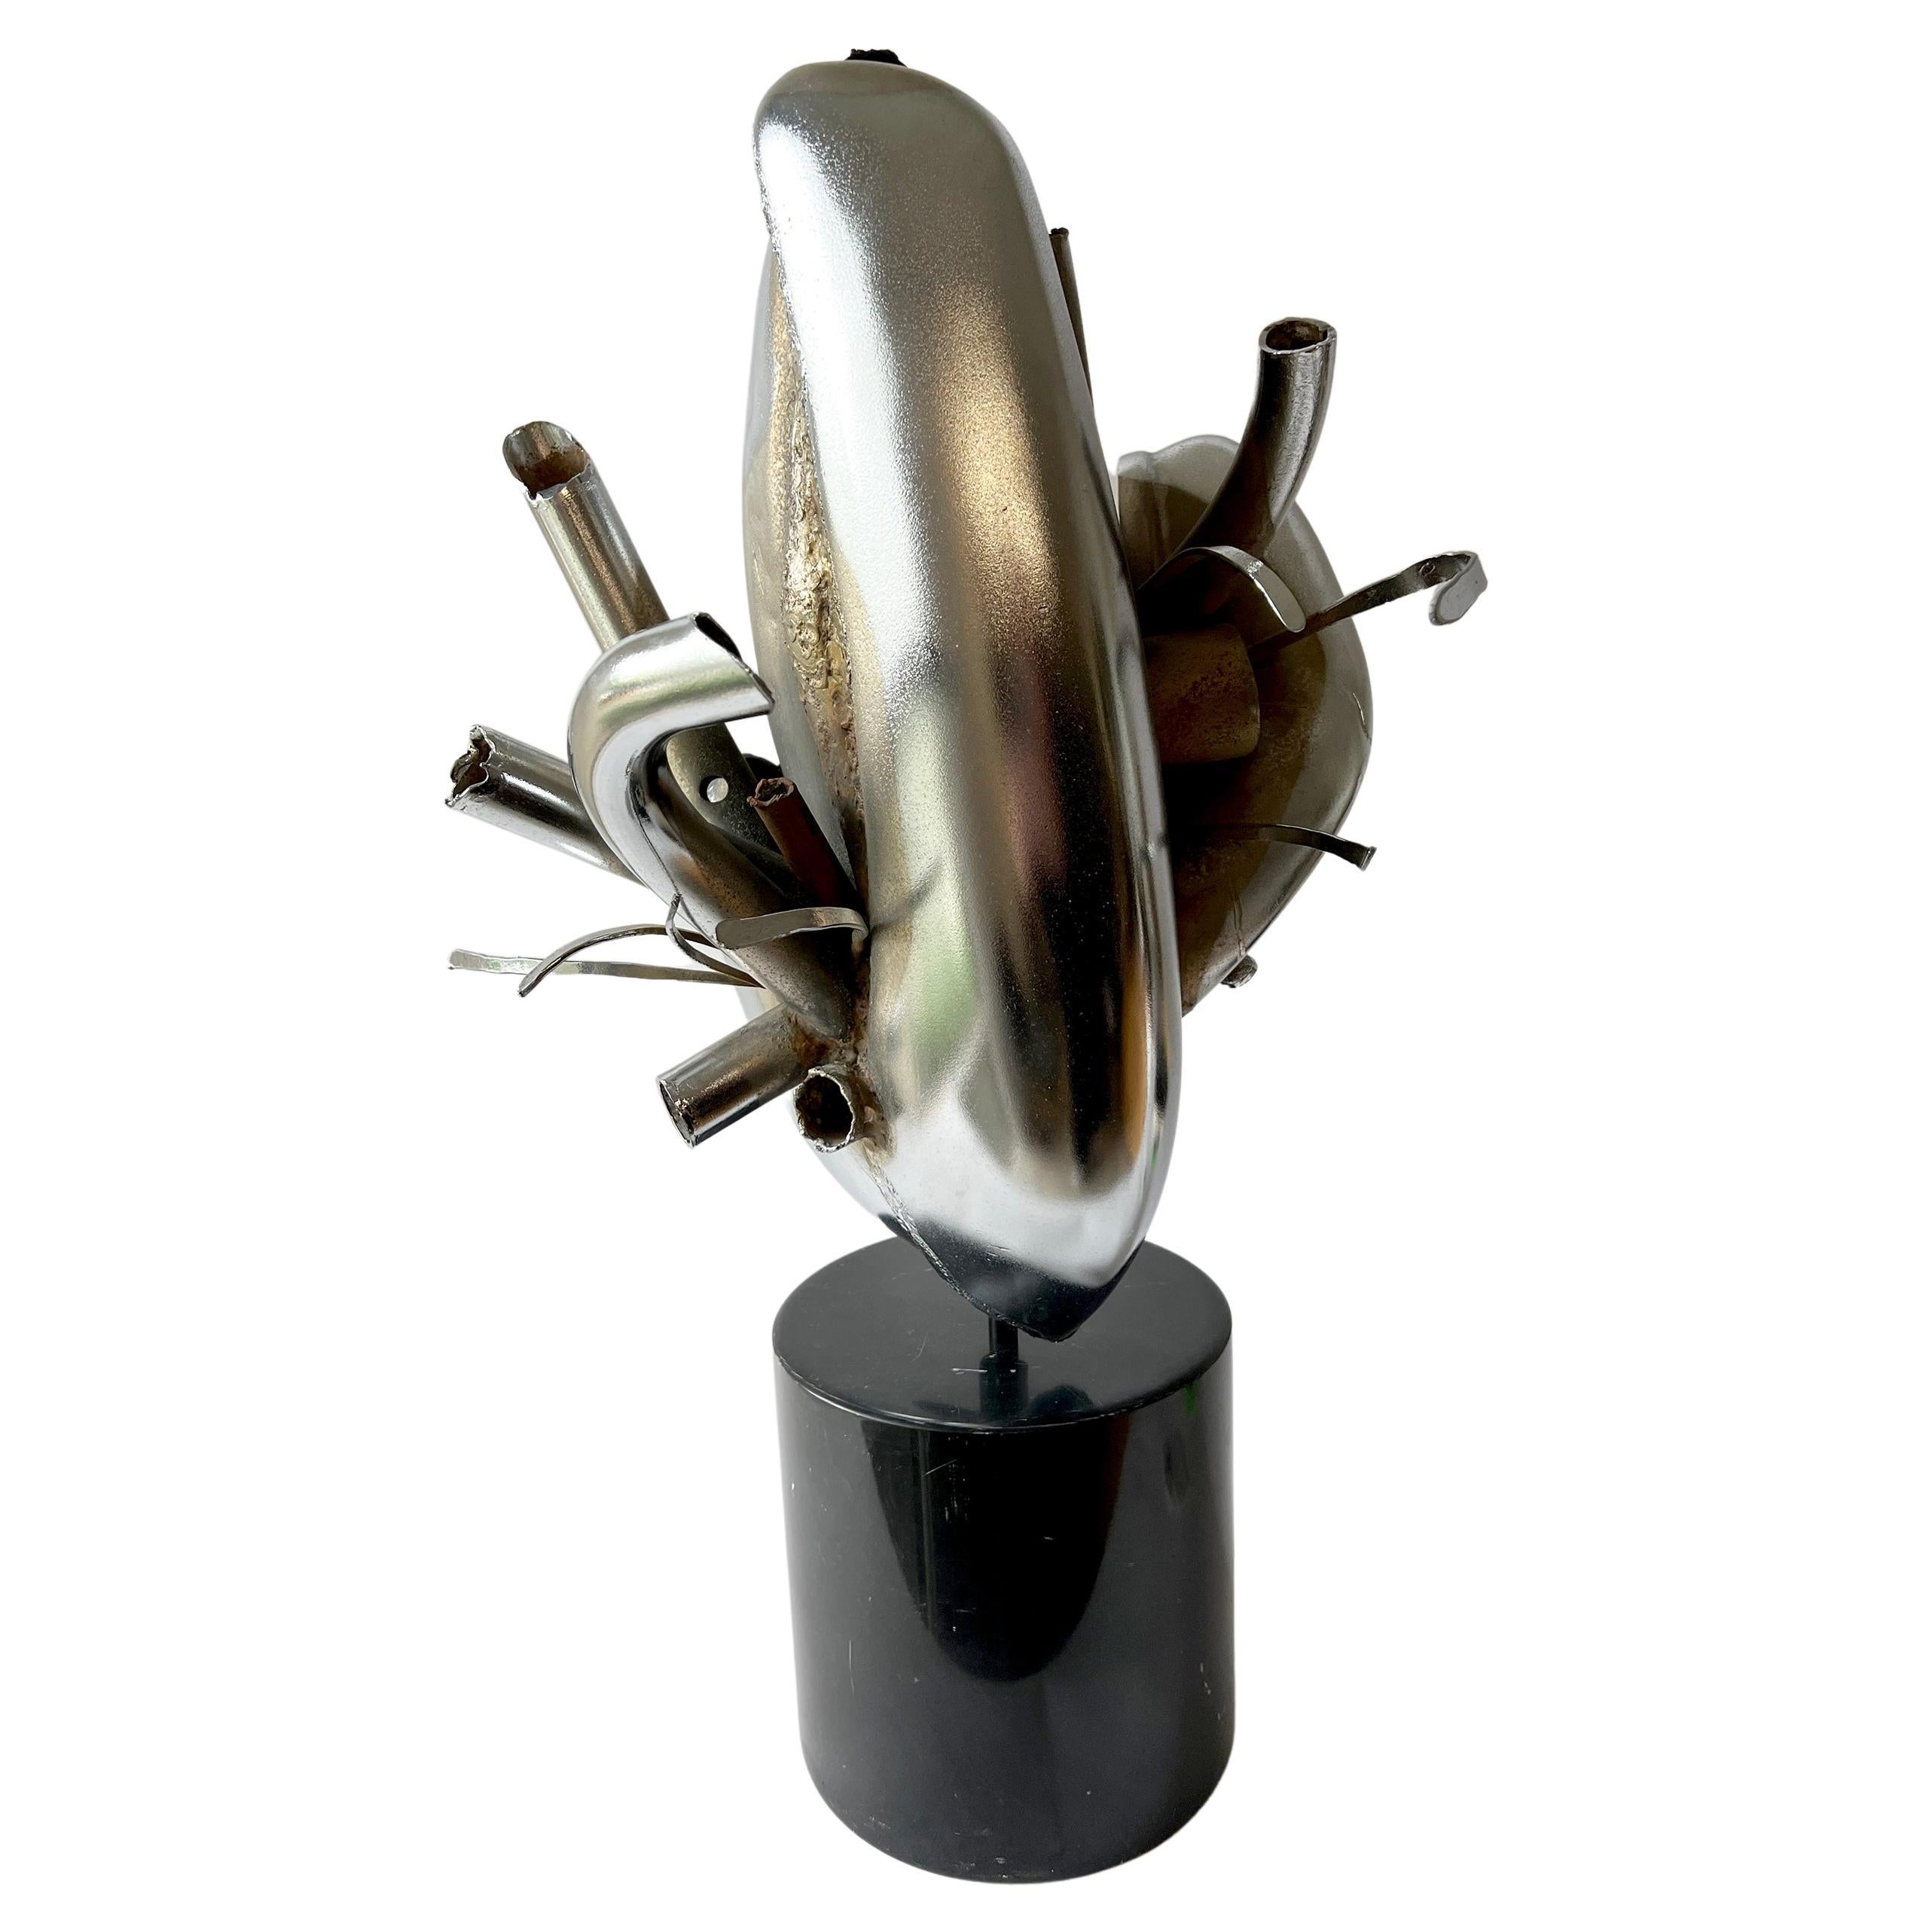 1960s Jason Seley Welded Chrome Automobile Bumper Abstract Sculpture  For Sale 3